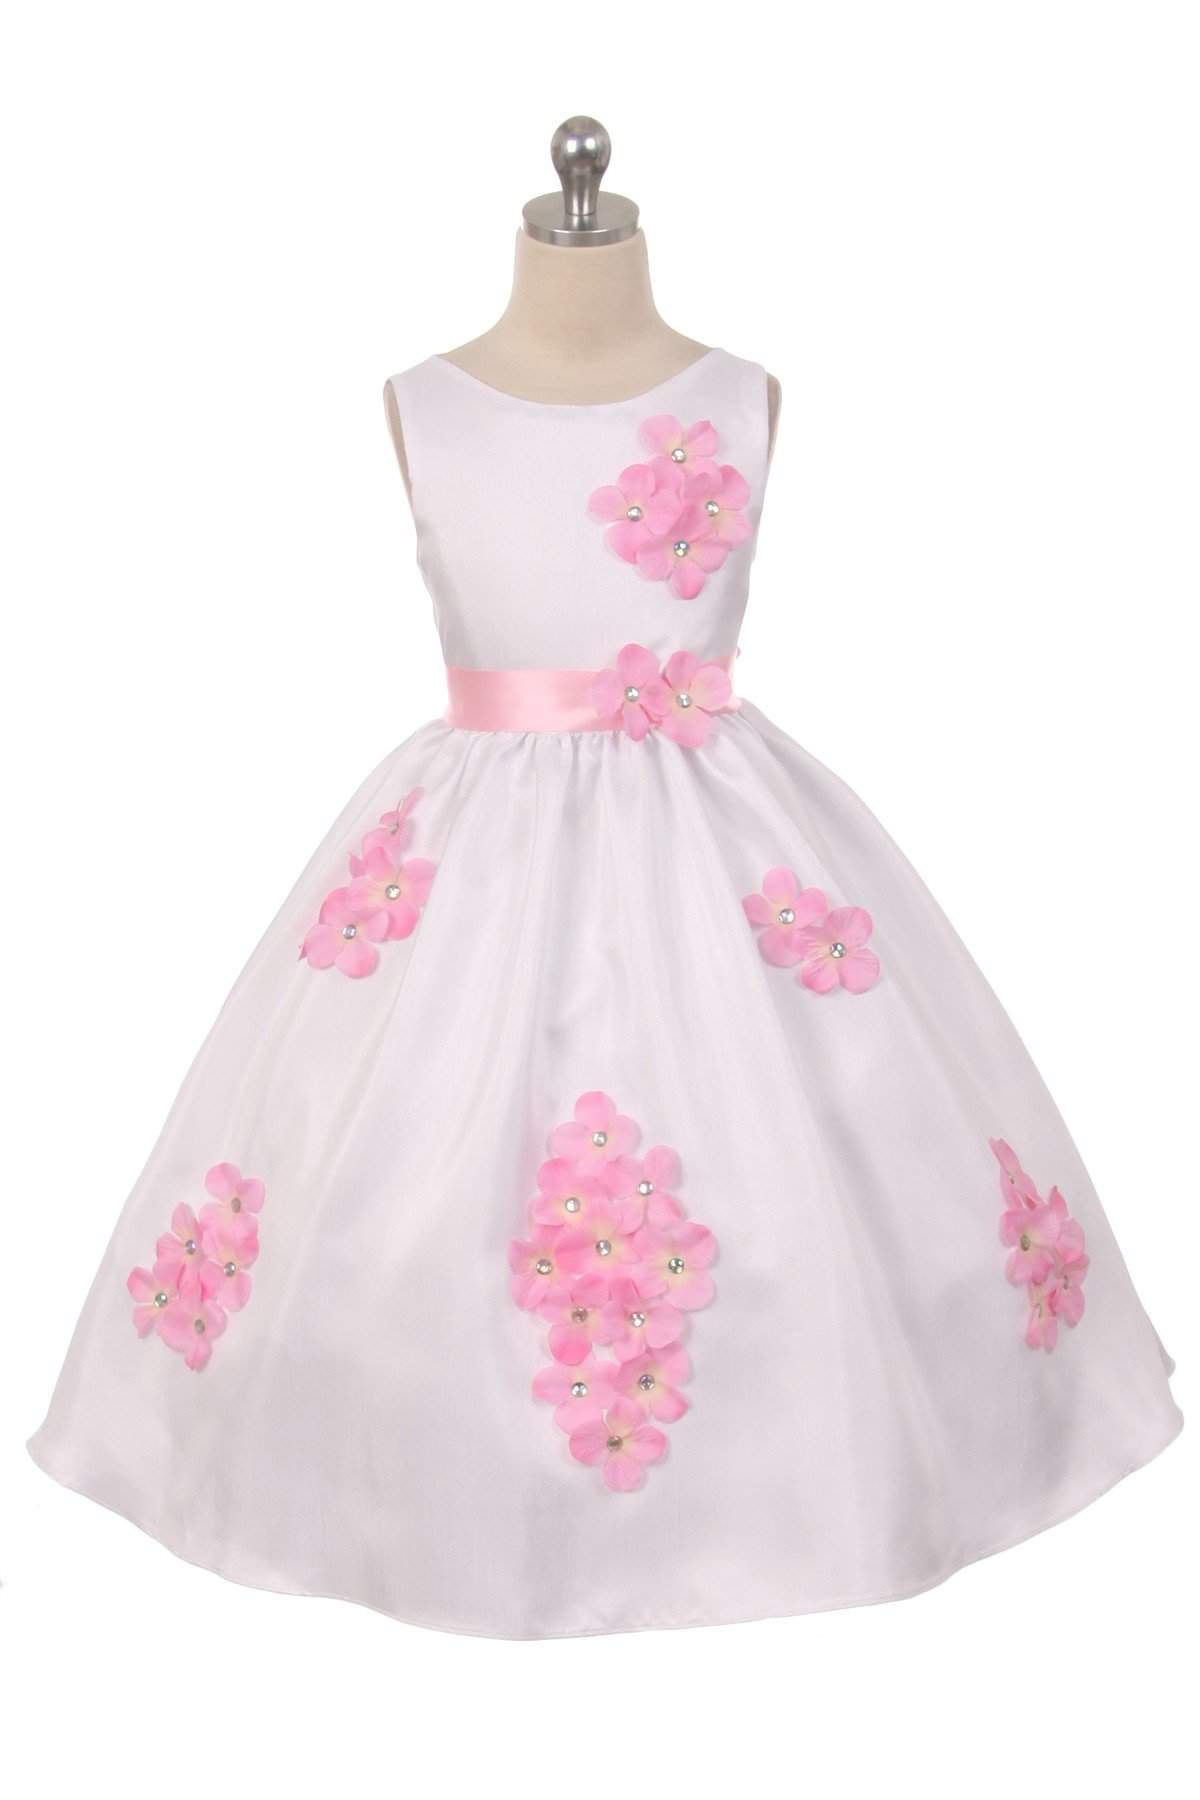 Shantung Dress Decorated with Flower Petals 2-14-Kid's Dream-1_2,3_4,5_6,7_8,big_girl,color_Blue,girl-dress,length_Tea Length,little_girl,meta-related-collection-shop-the-outfit-girls,Pink-collection,size_02,size_04,size_06,size_08,size_10,size_12,size_14